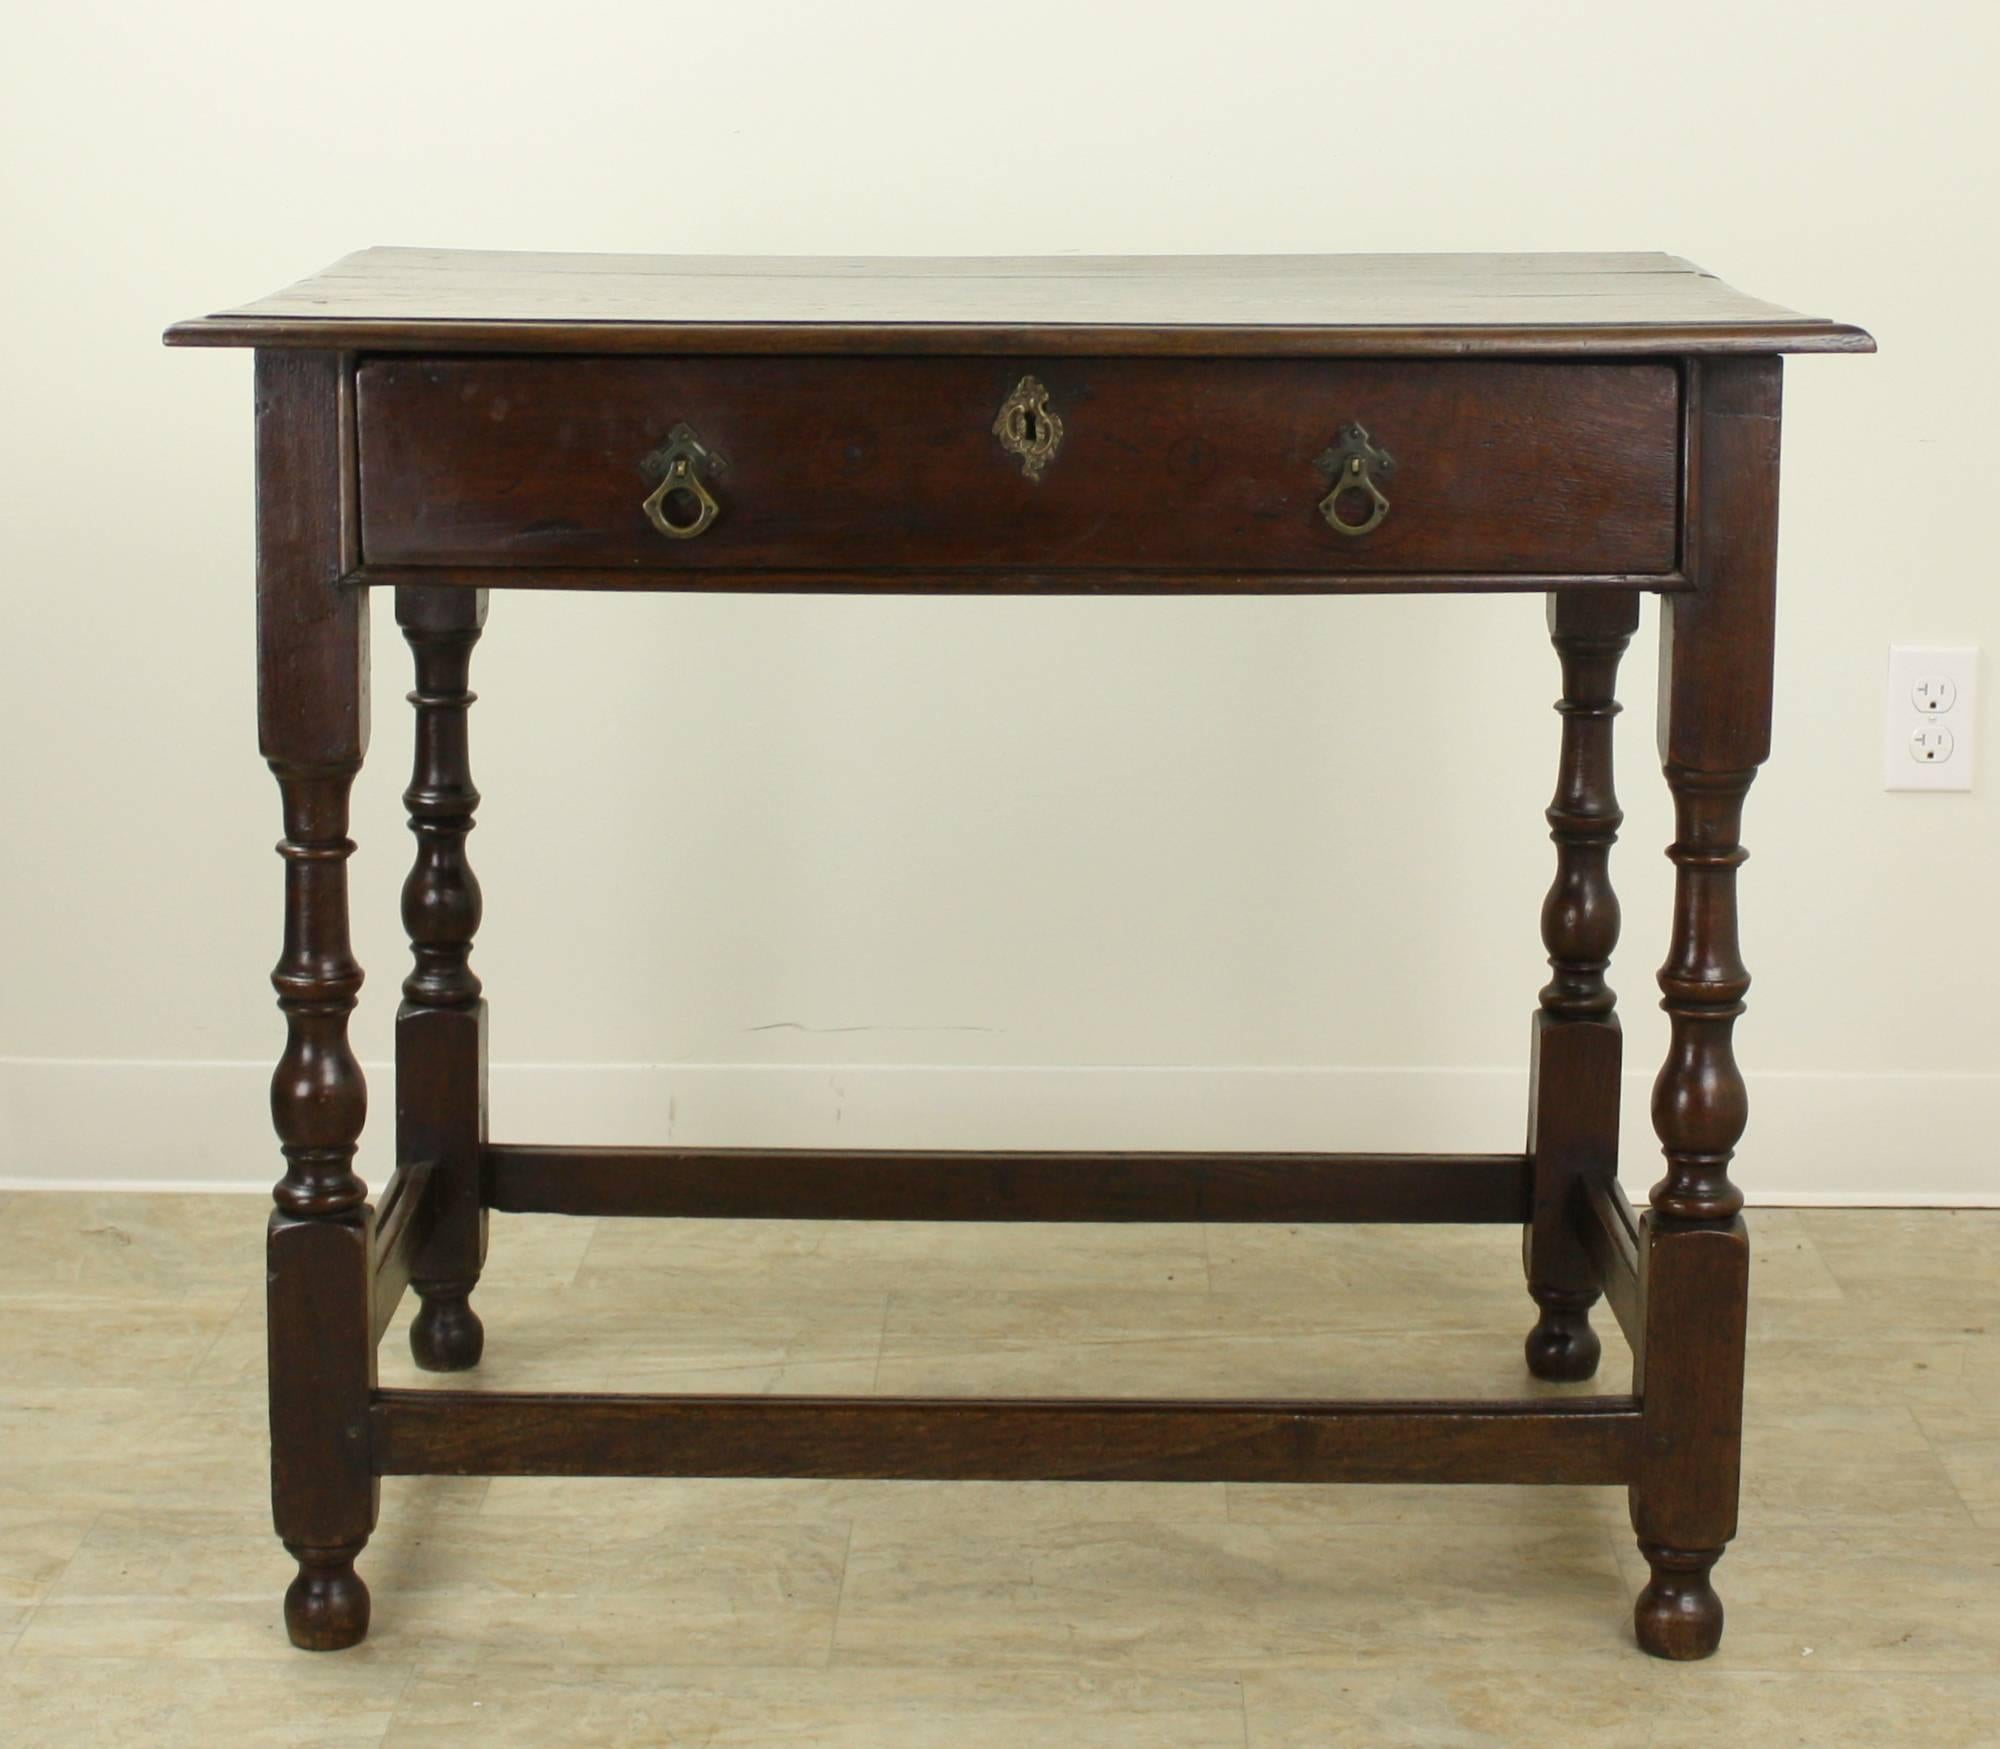 A handsome and generously proportioned period oak side or occasional table from Wales.  The top and legs are in very good condition for a piece of this age.  The wood is rich and dark with nice patina, and the single wide drawer is roomy and slides